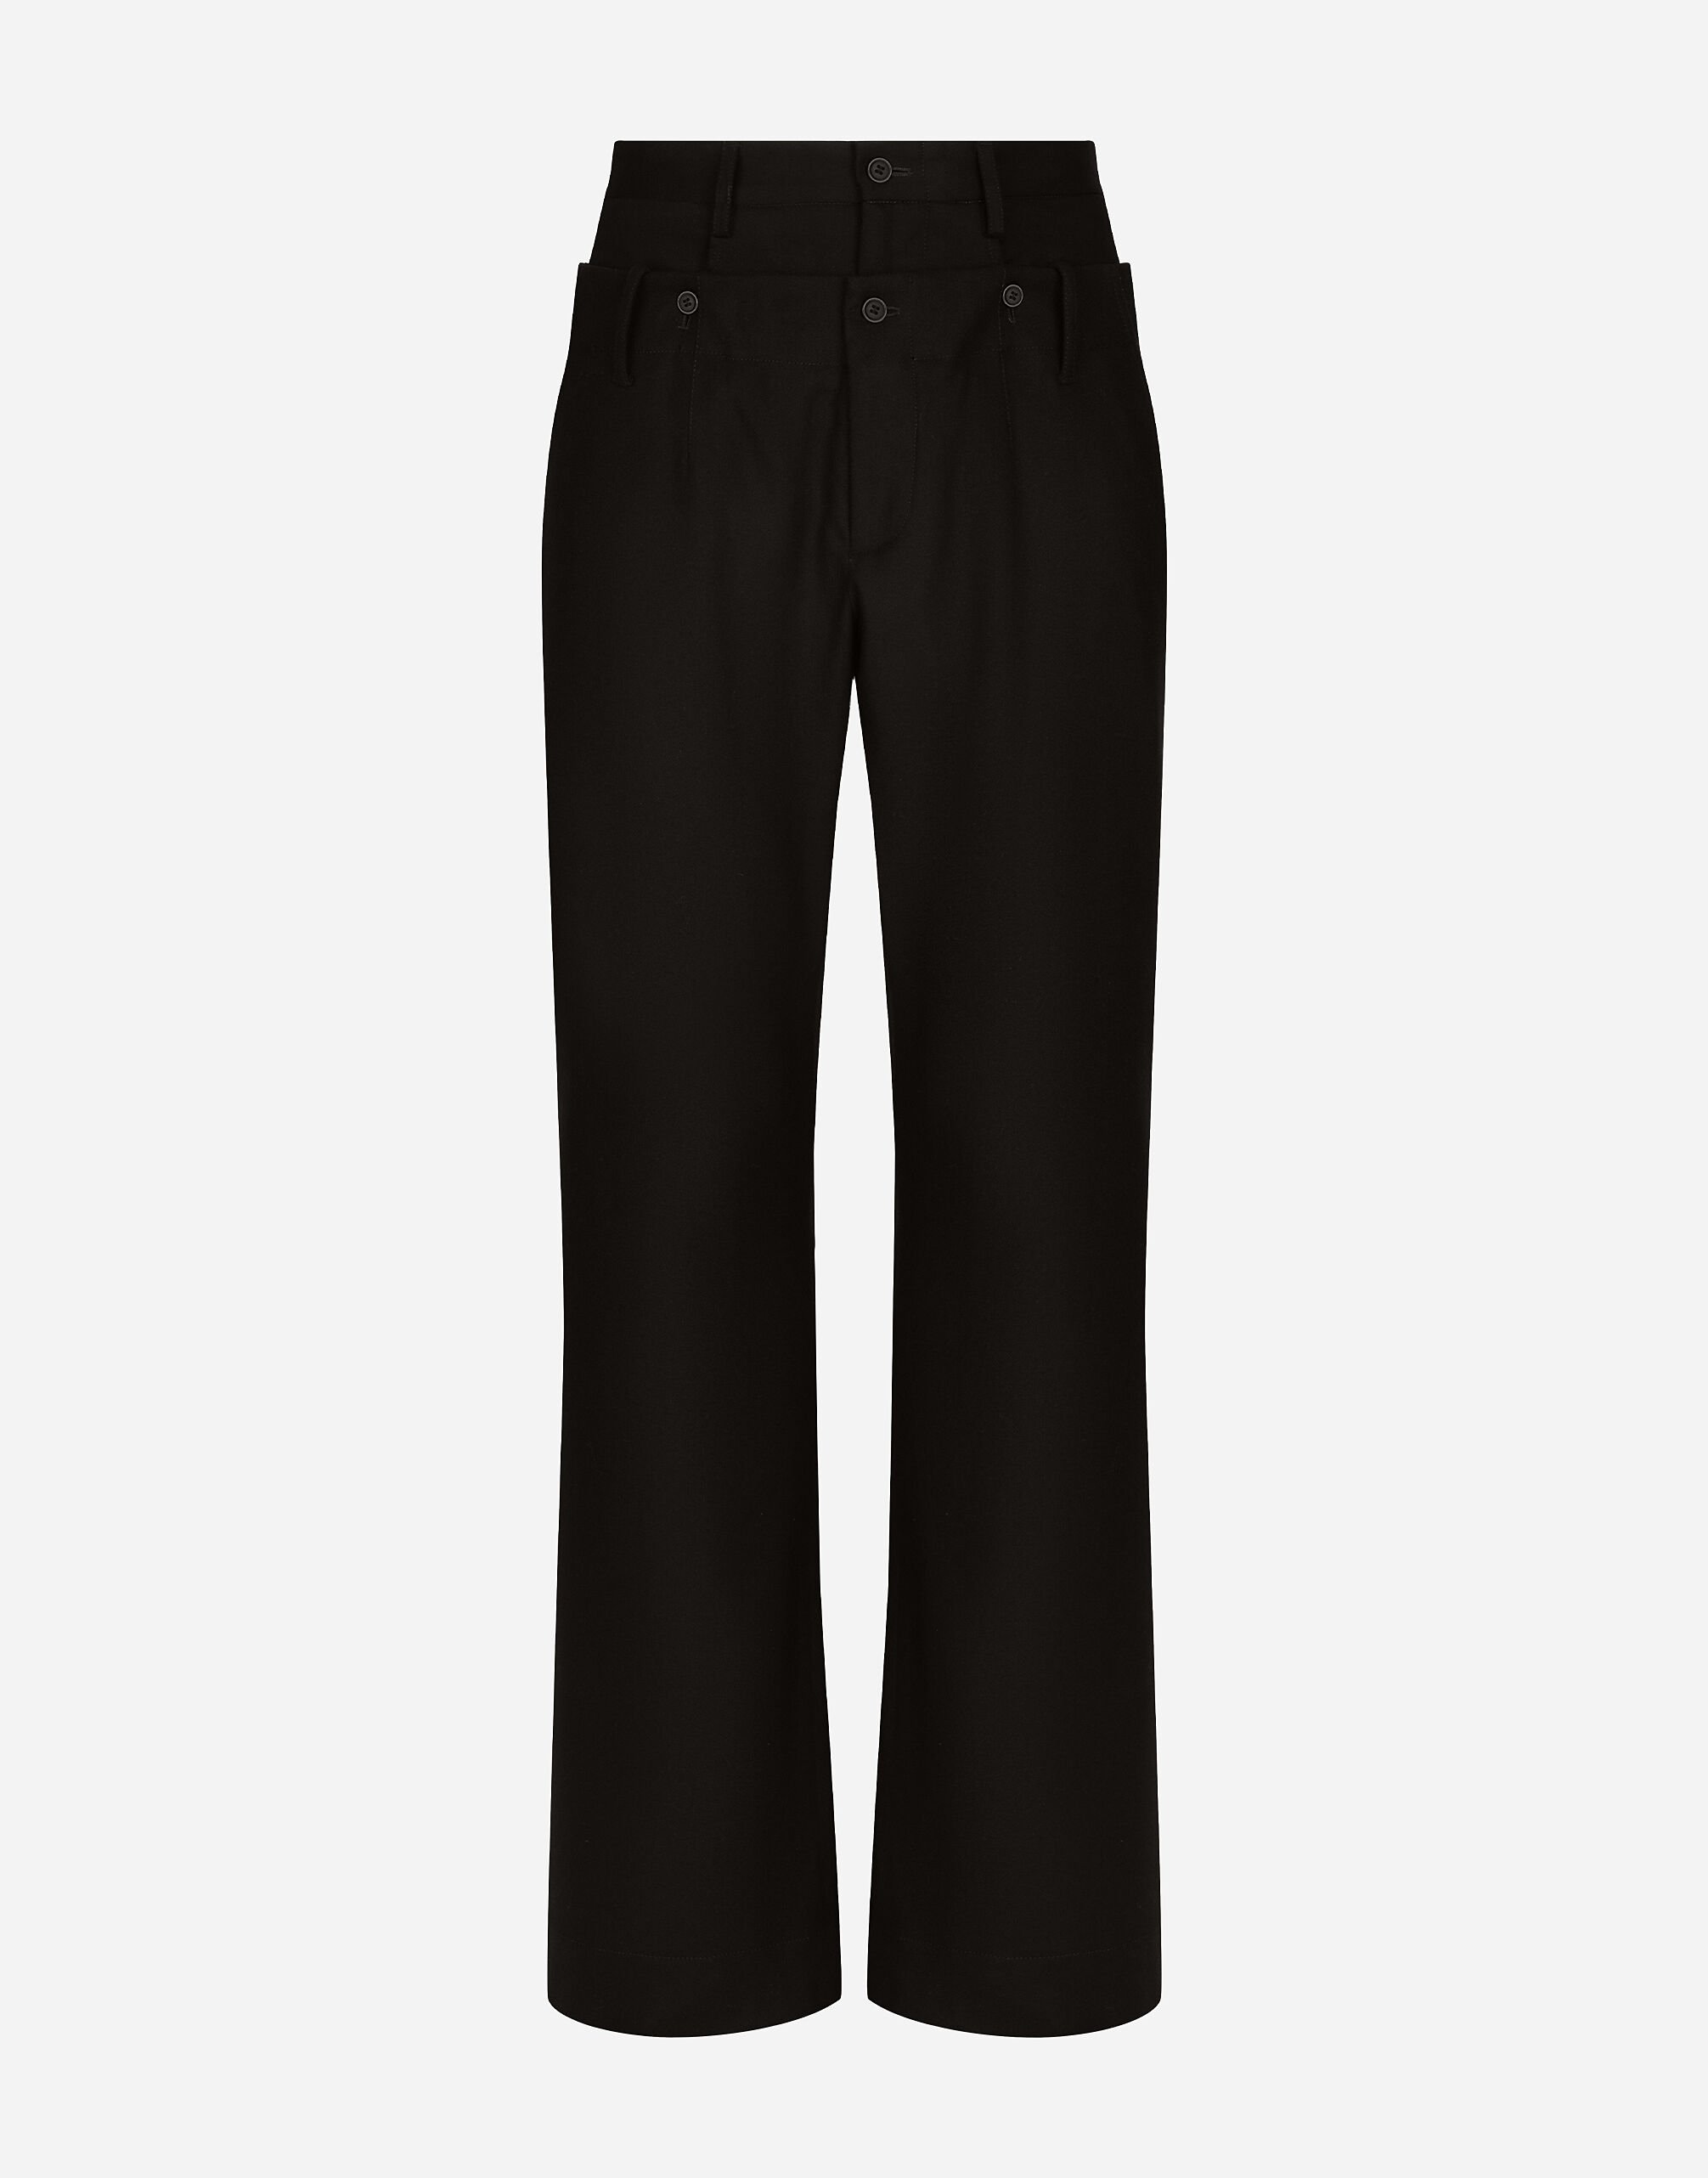 Dolce & Gabbana Stretch wool pants with double belt White CS2079AO666